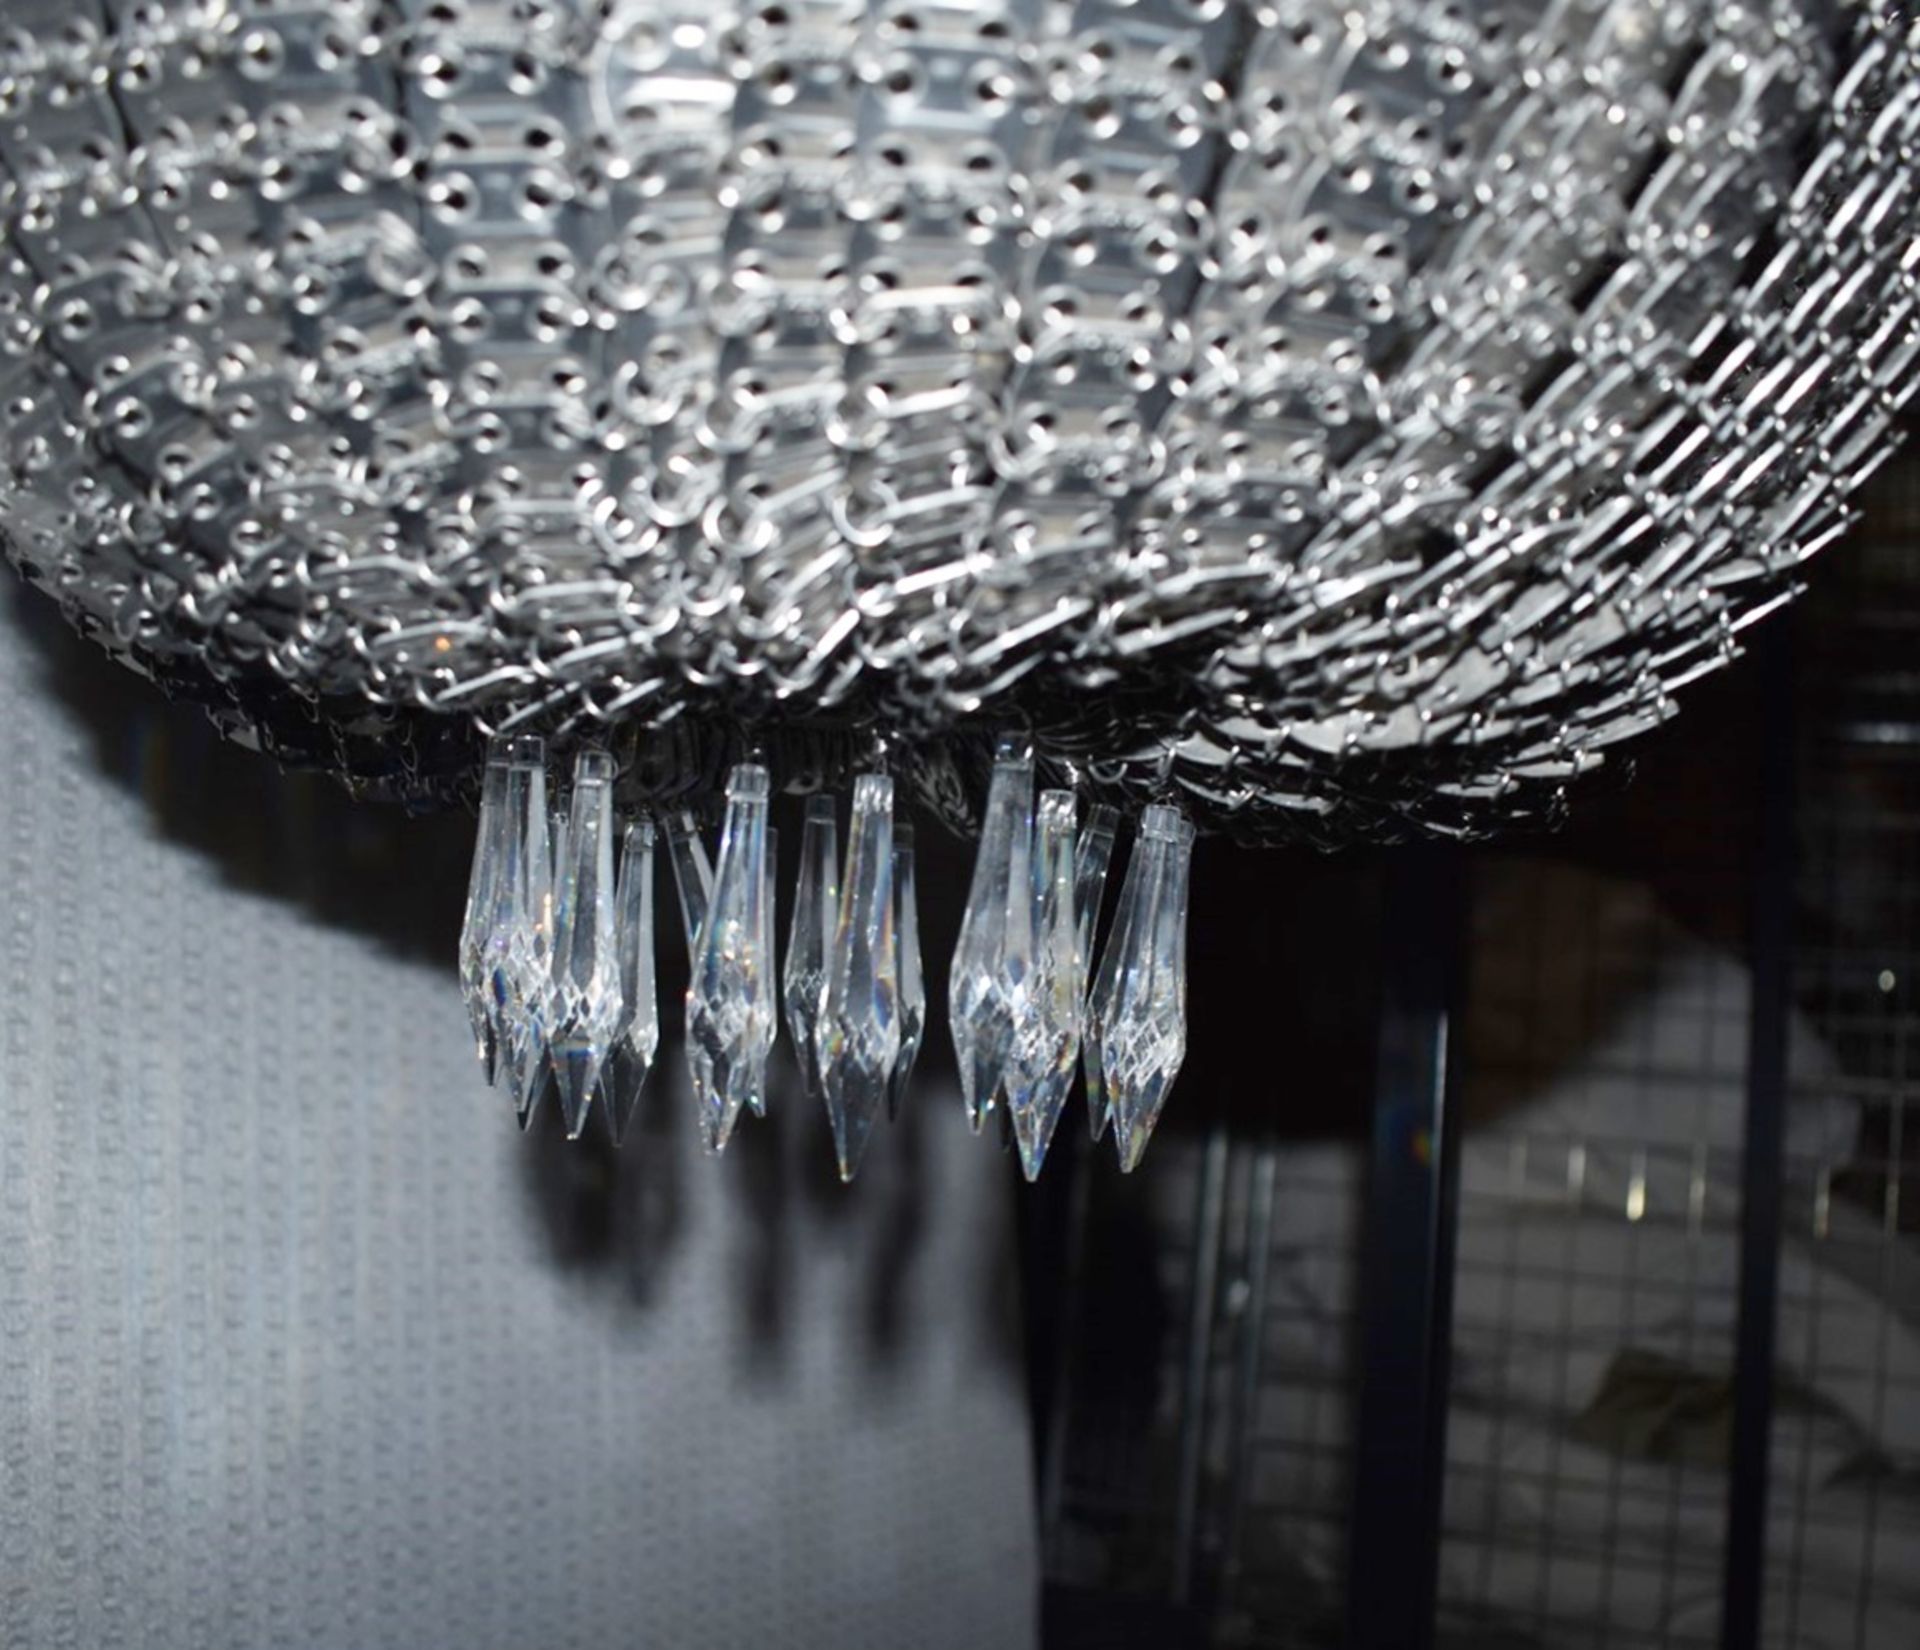 1 x Opulent Chainmail Chandelier with Crystal Glass Droplets - Procured From An Exclusive Property - Image 5 of 8